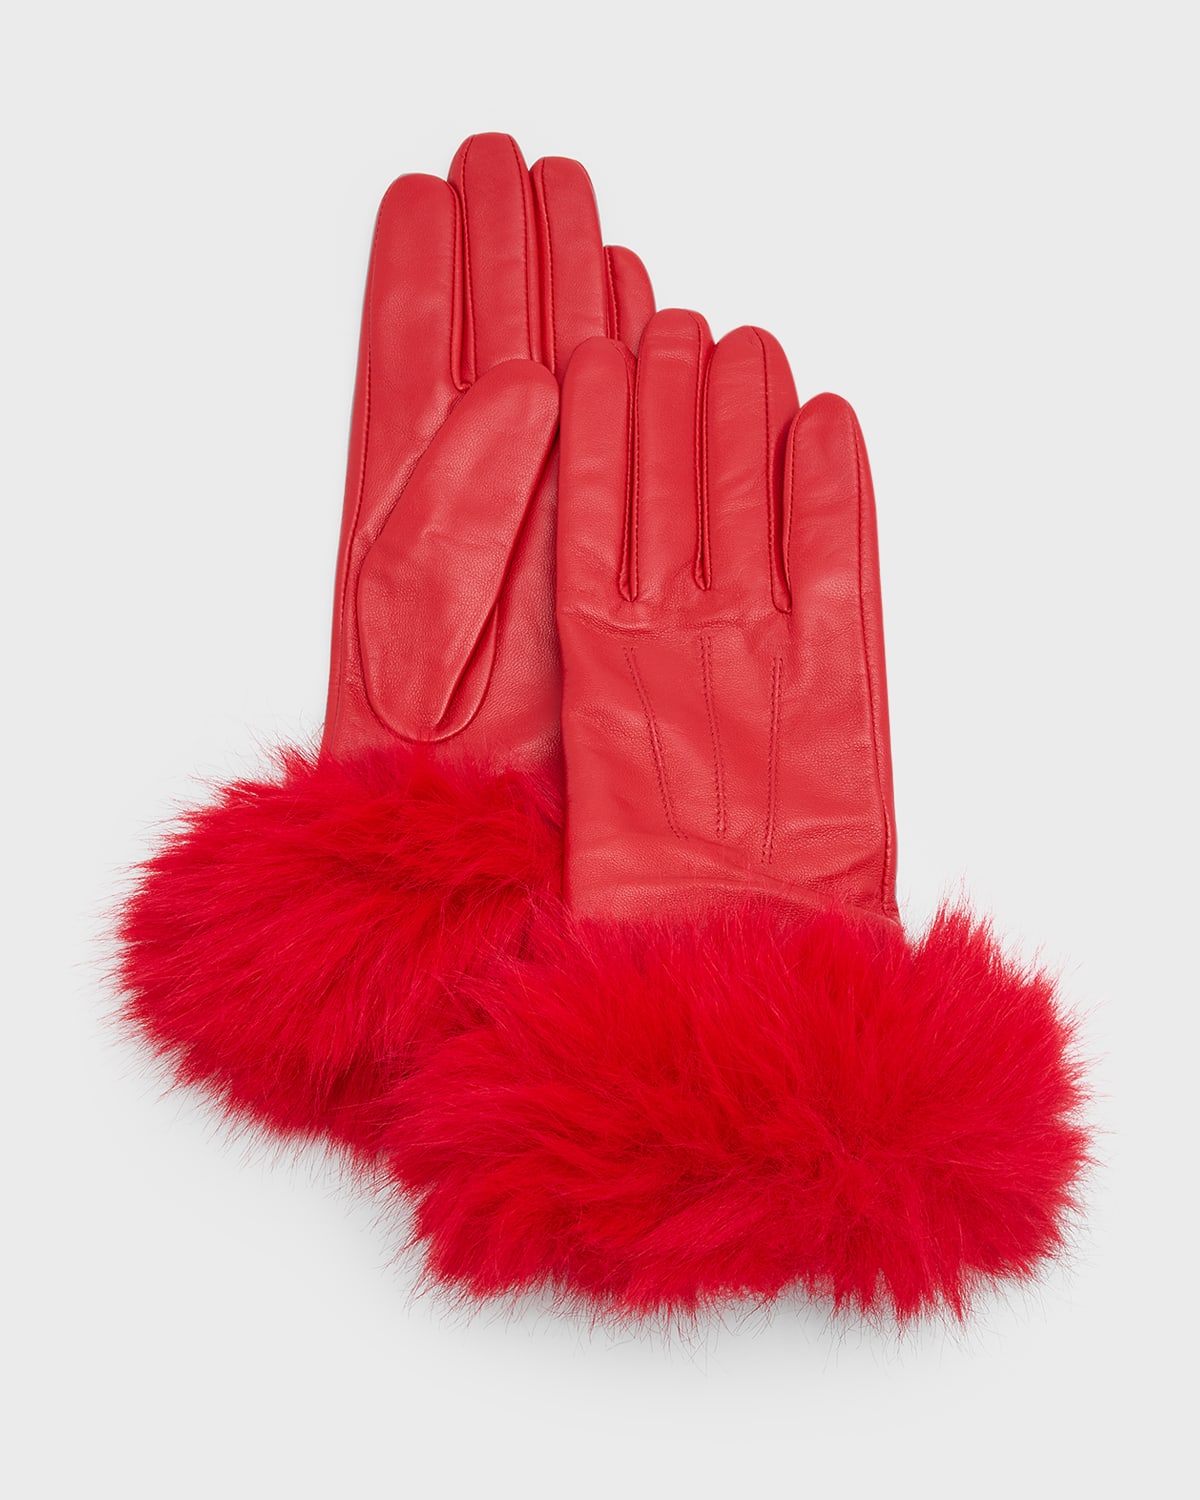 Sofia Cashmere Leather & Cashmere Gloves With Faux Fur Cuffs In Red